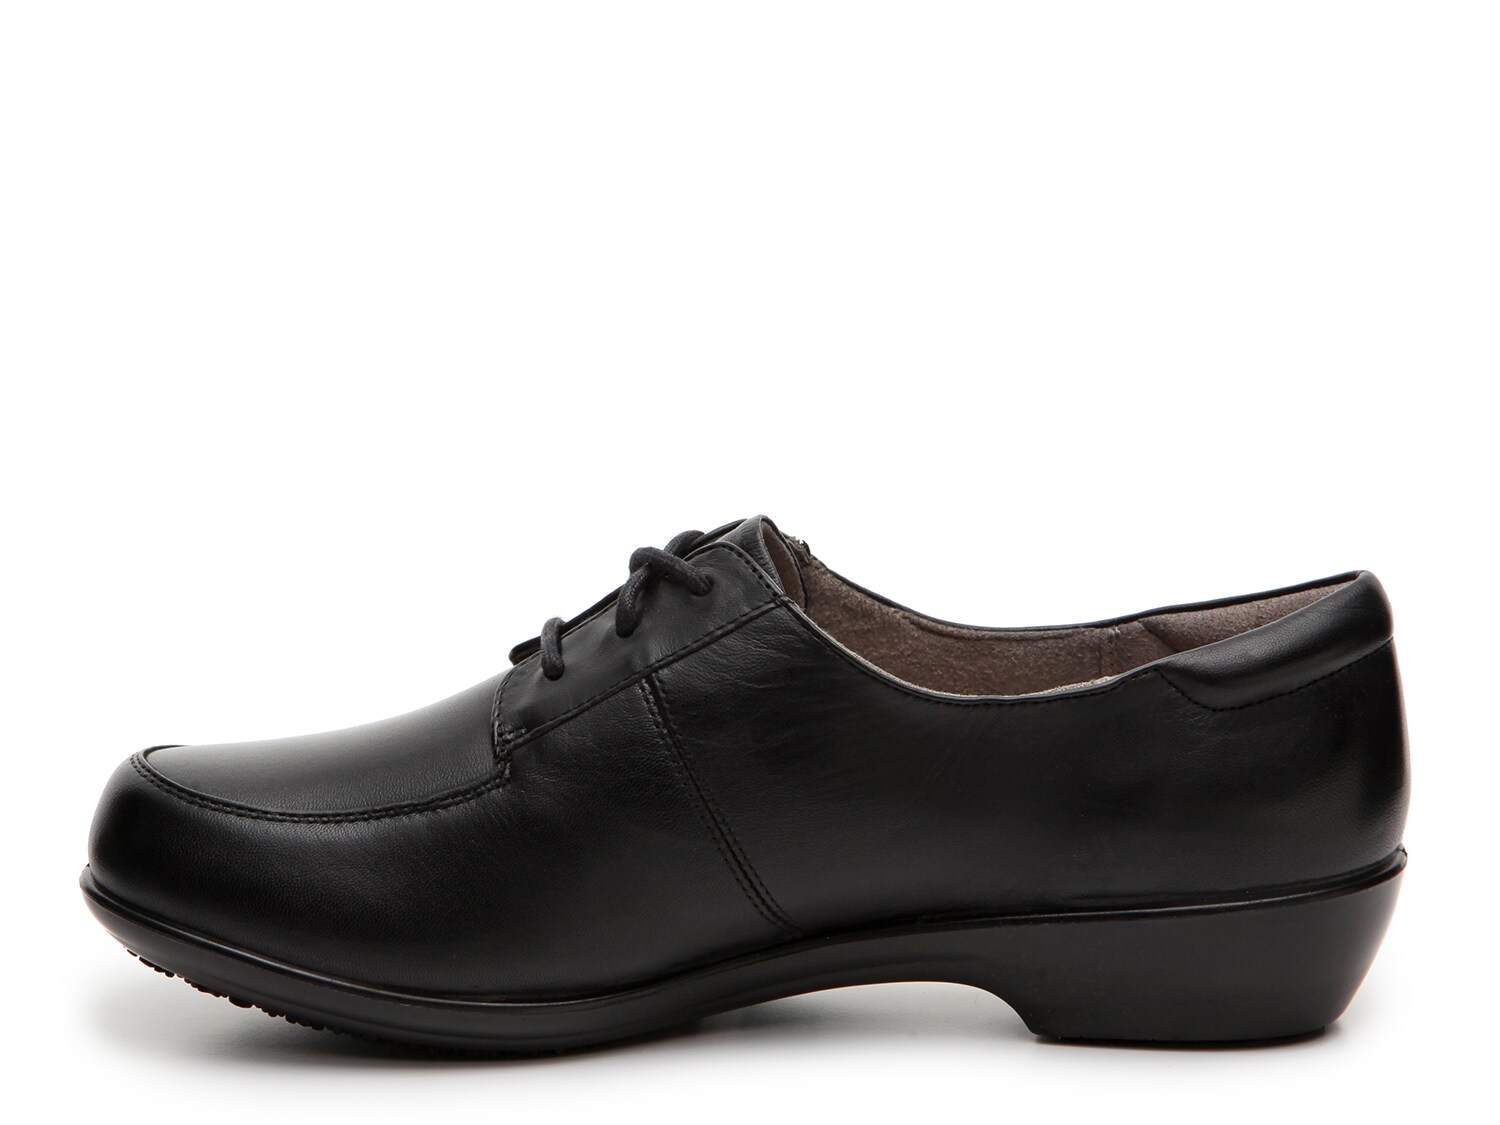 naturalizer bell work oxford